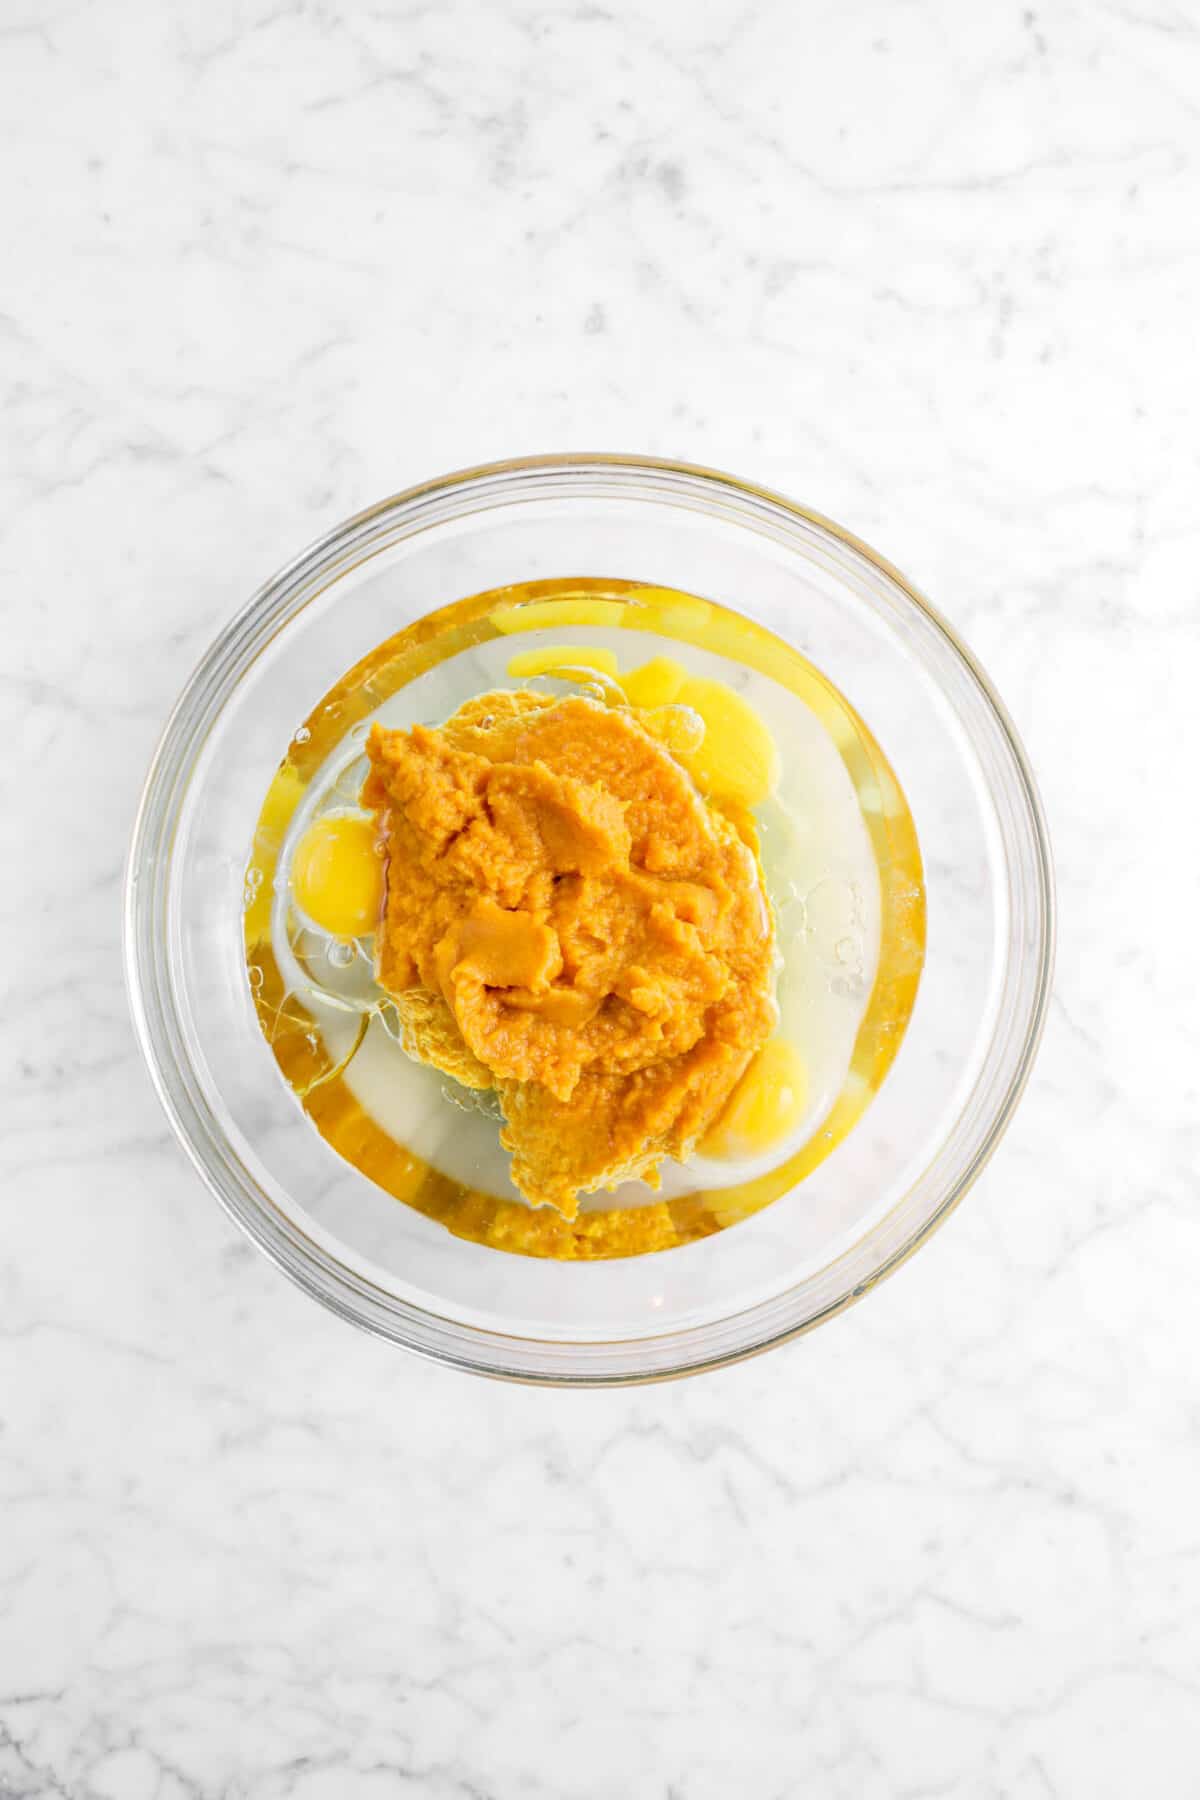 vegetable oil, eggs, and pumpkin in a glass bowl